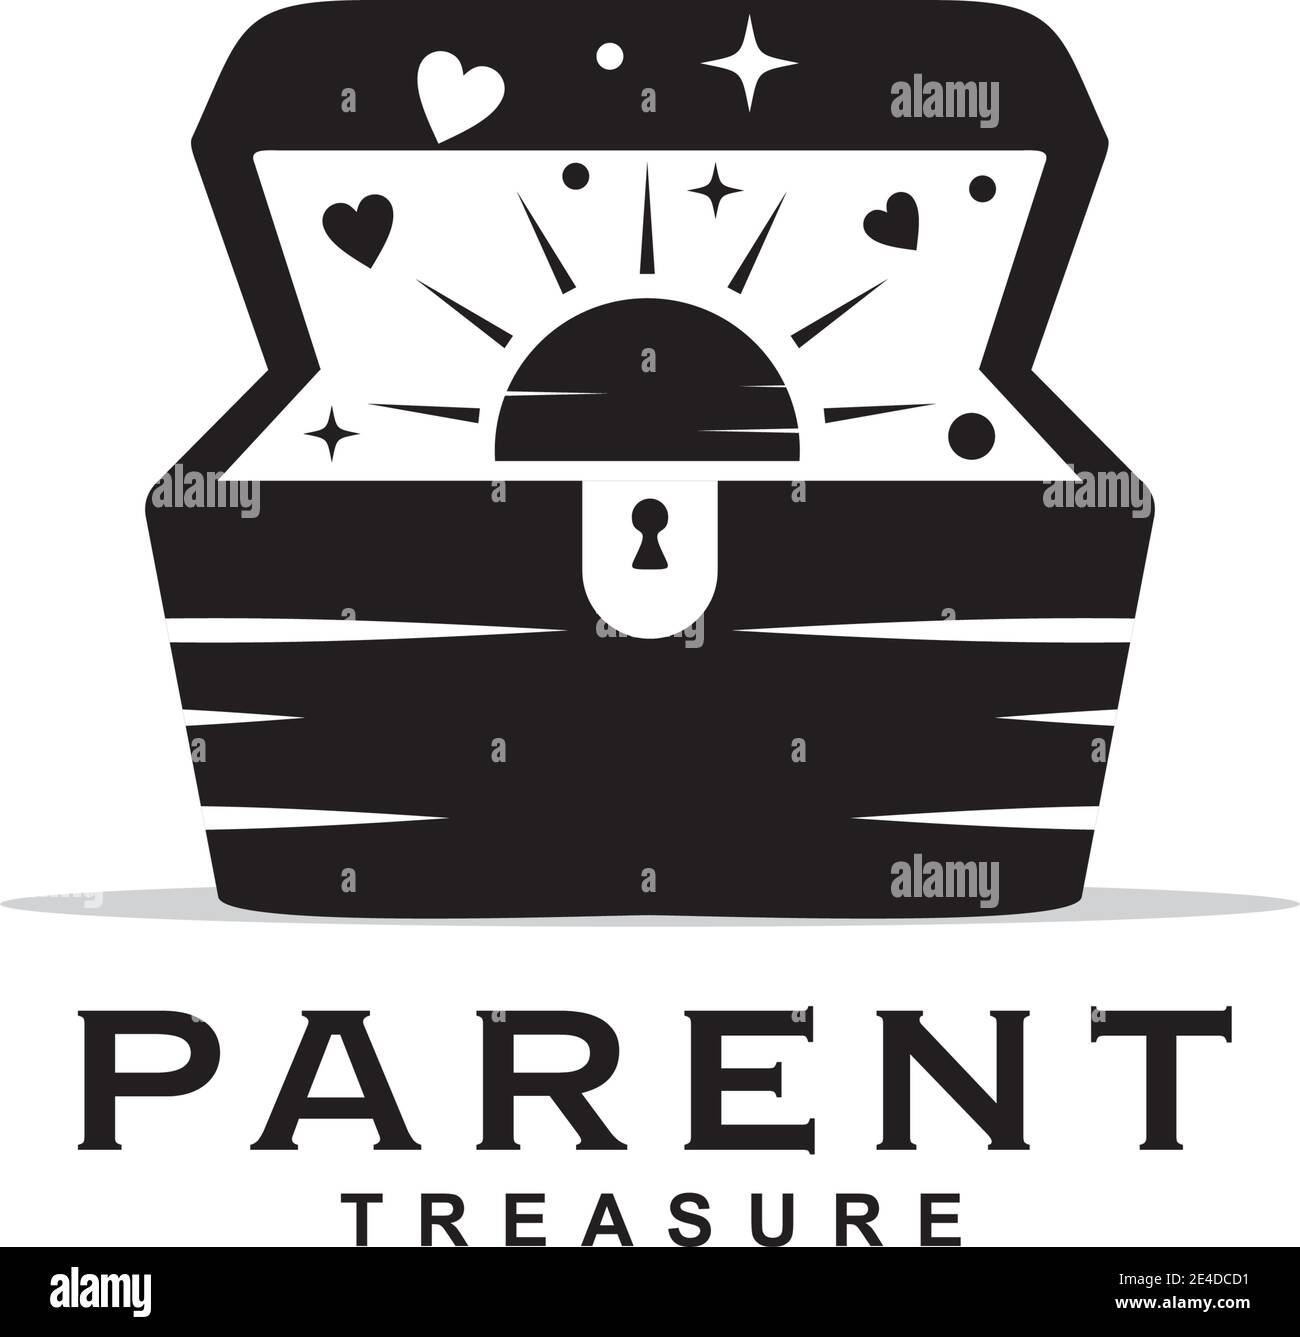 Parenting logo design with treasure chest icon template Stock Vector